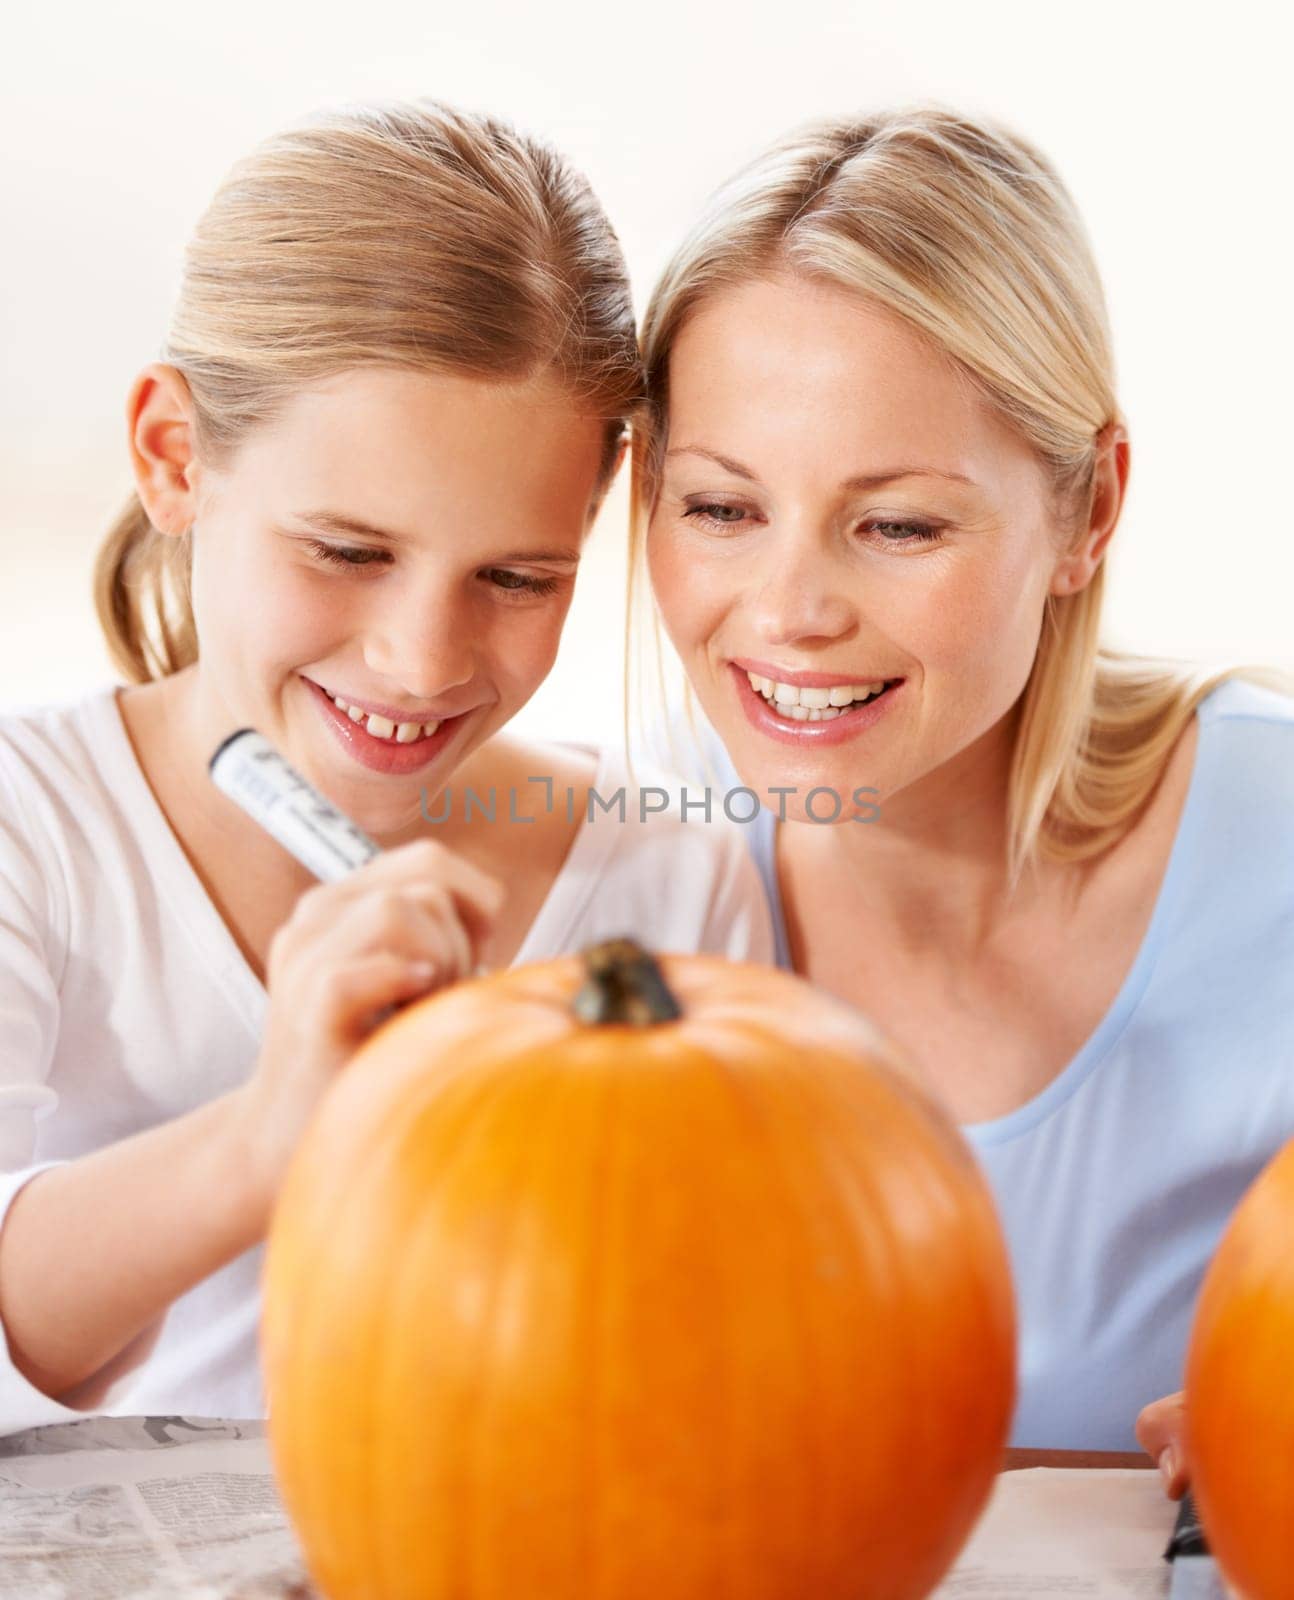 Child, mother and smile for drawing on pumpkin, craft and celebrate halloween party at home. Happy girl kid, mom or family writing with pen marker on vegetable, holiday lantern or creative decoration by YuriArcurs